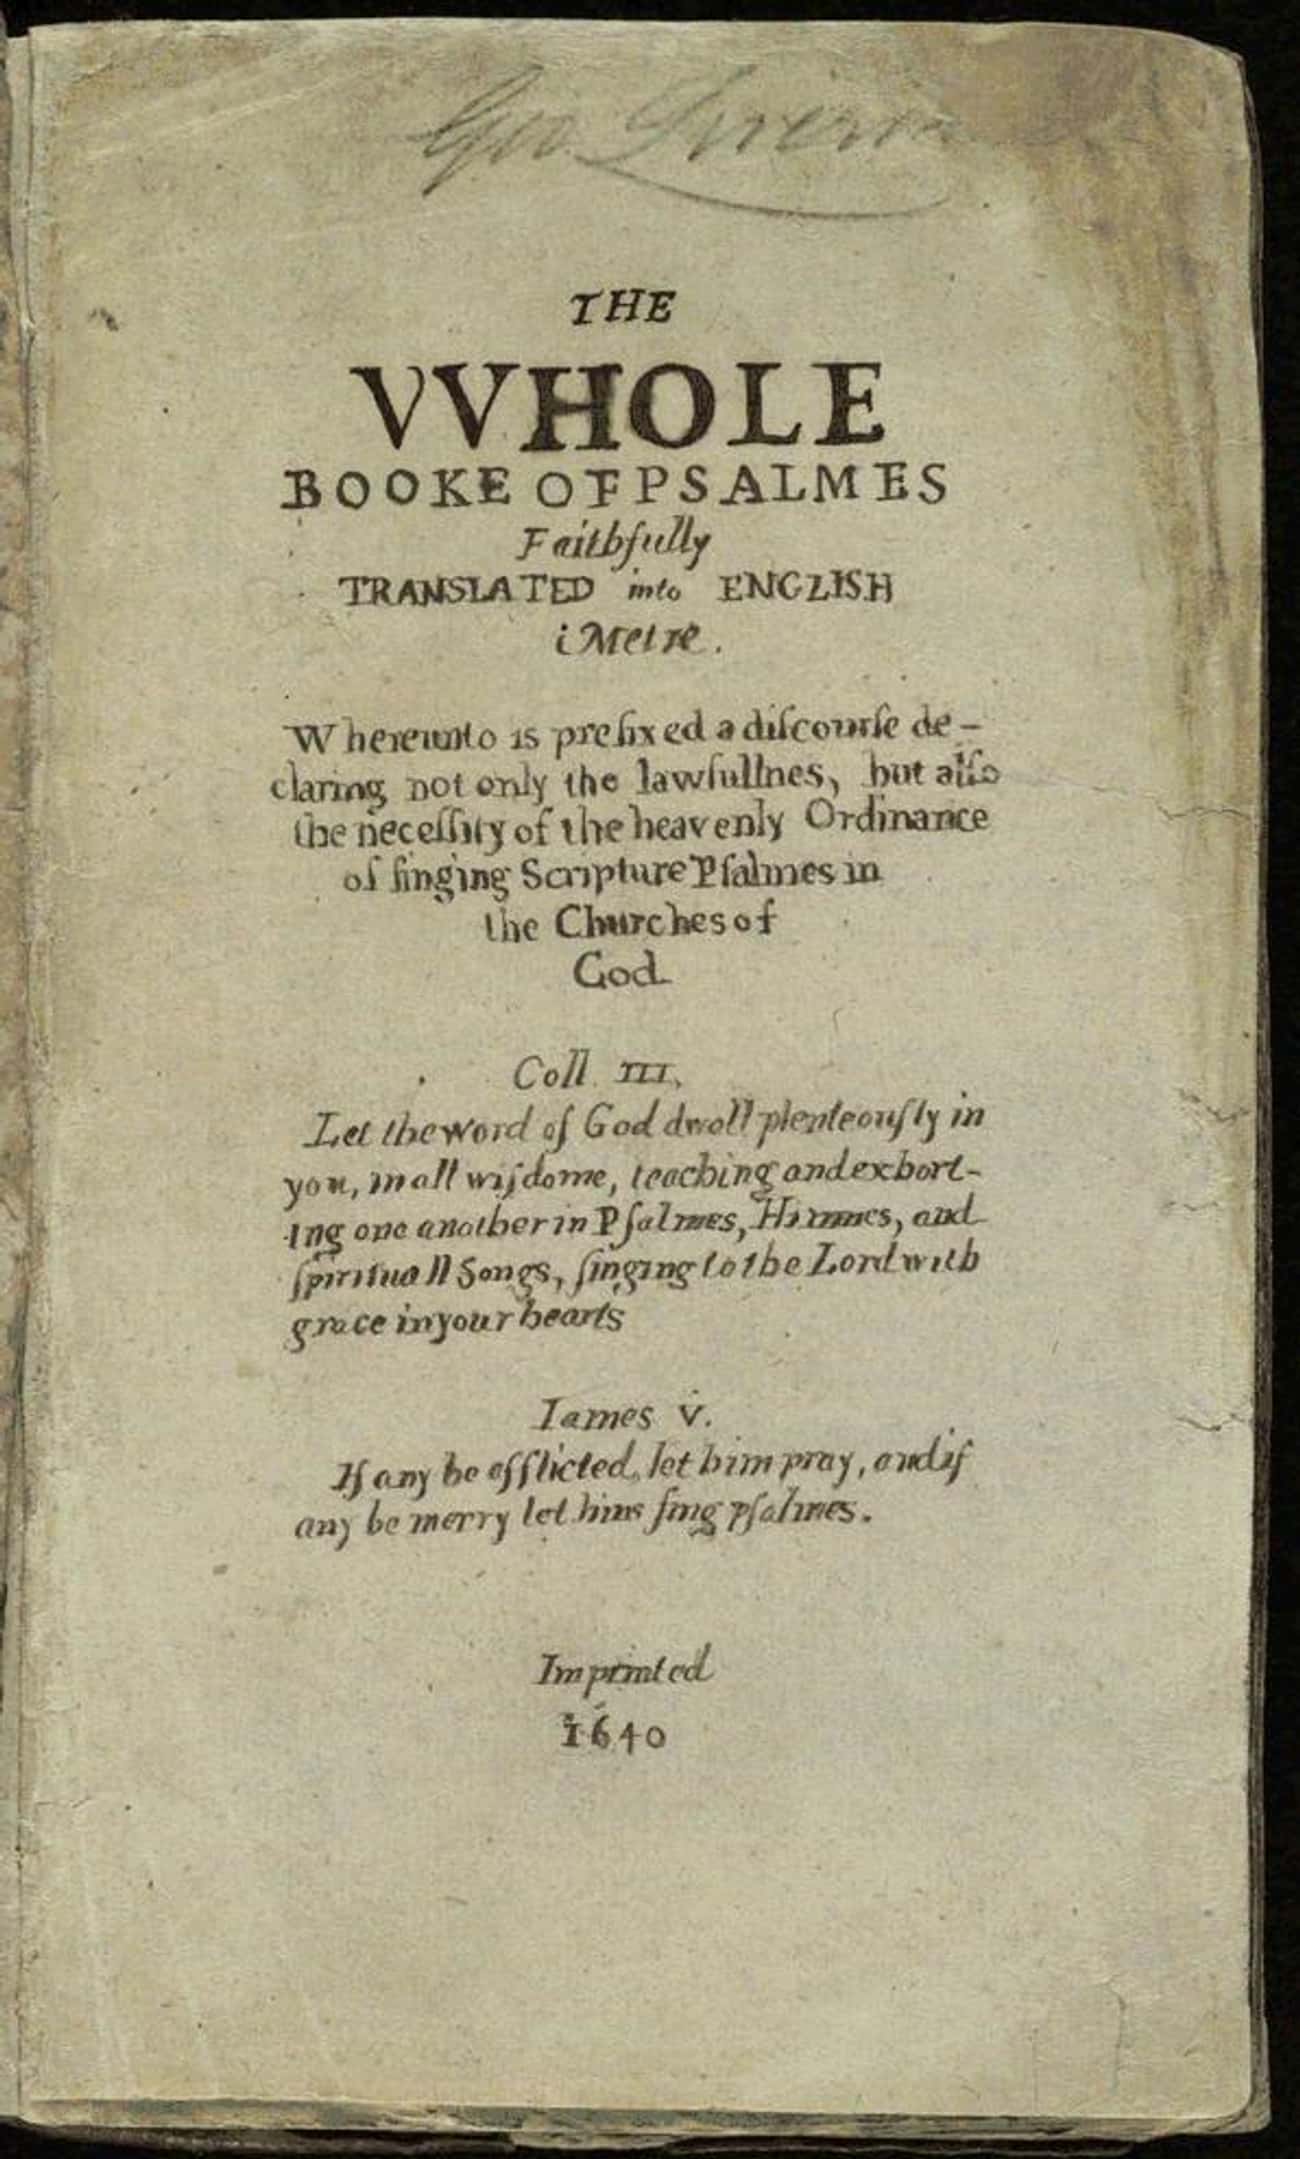 First Known Book Printed In America